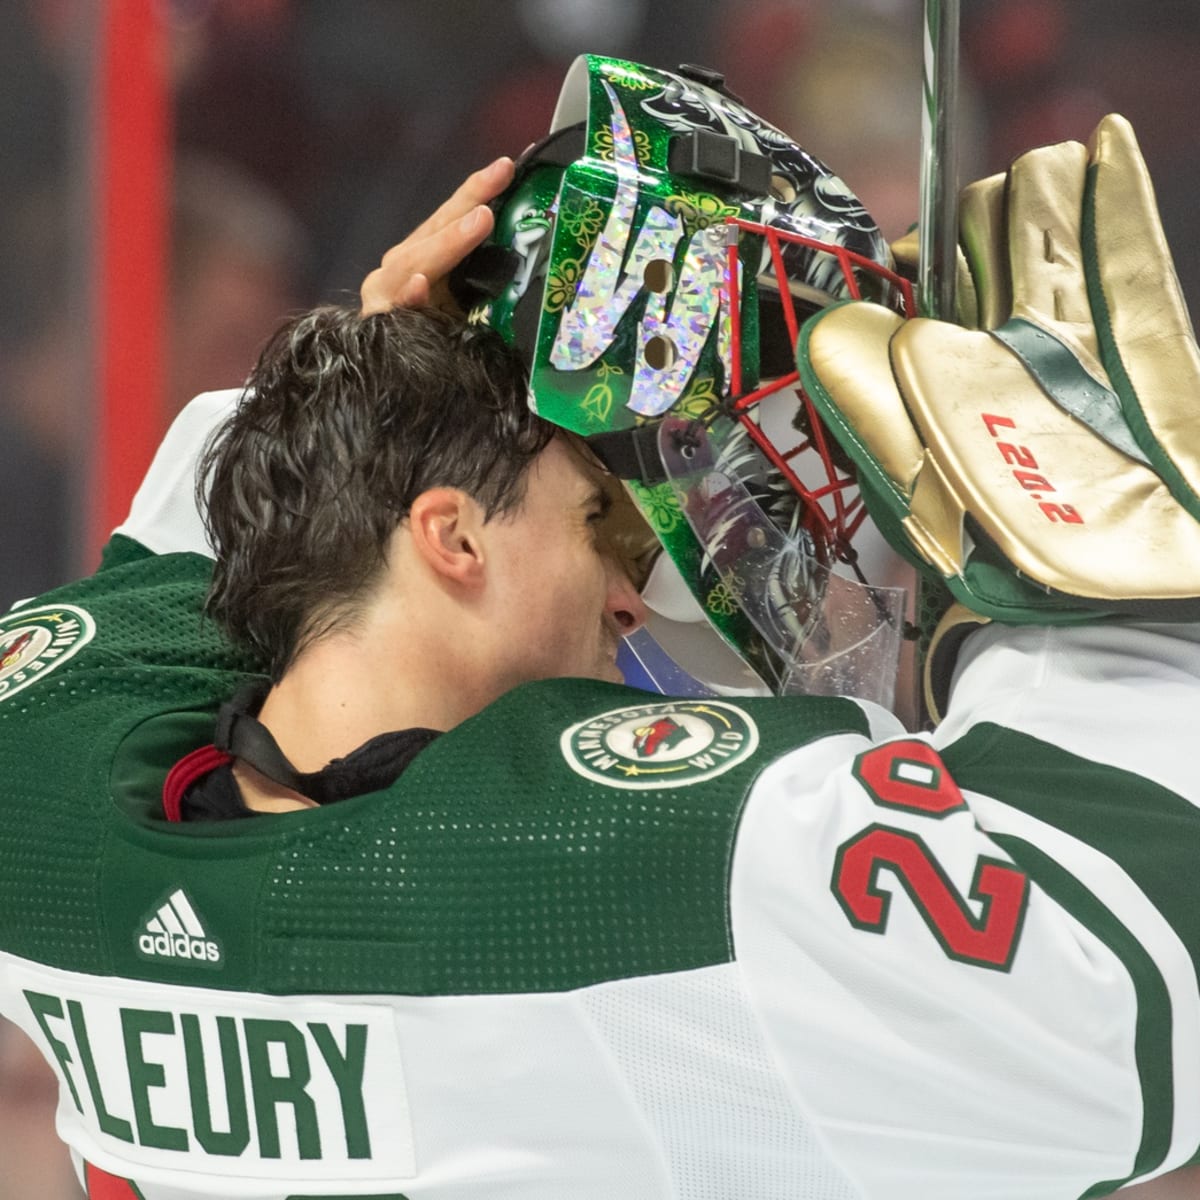 Fleury Furious Following Loss, Taking Personal Leave From Wild